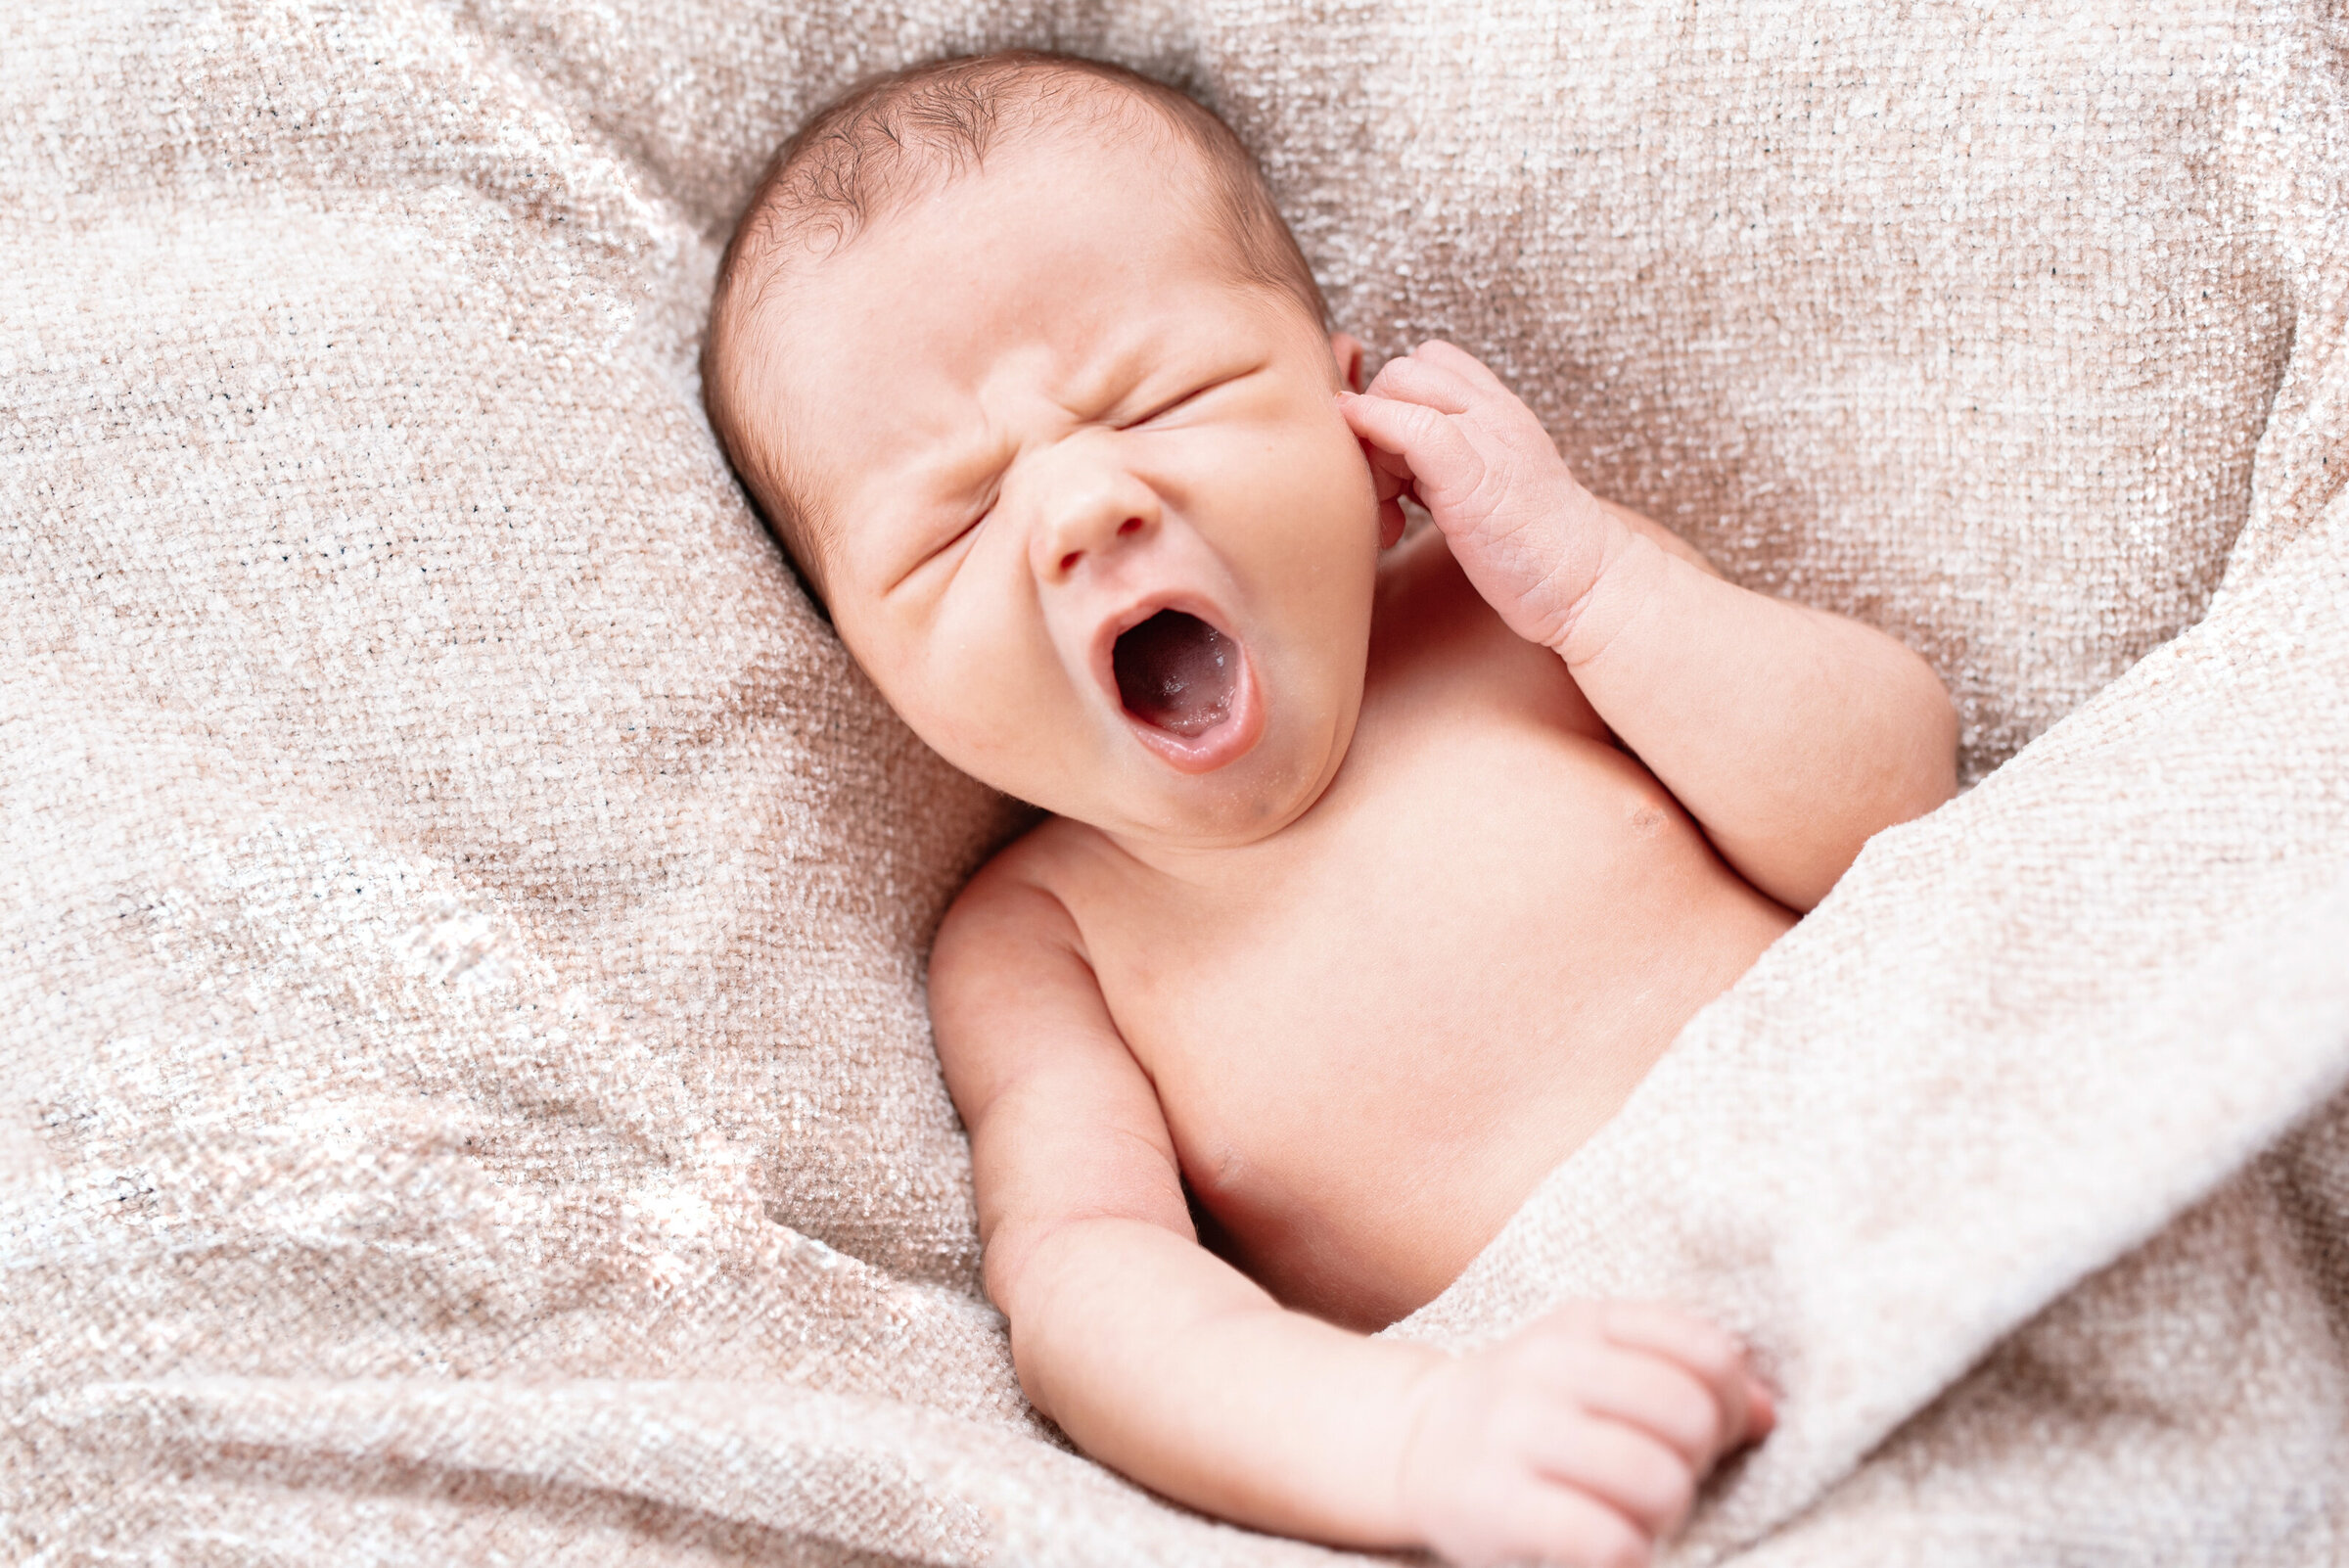 Newborn baby wrapped in blankets, yawning